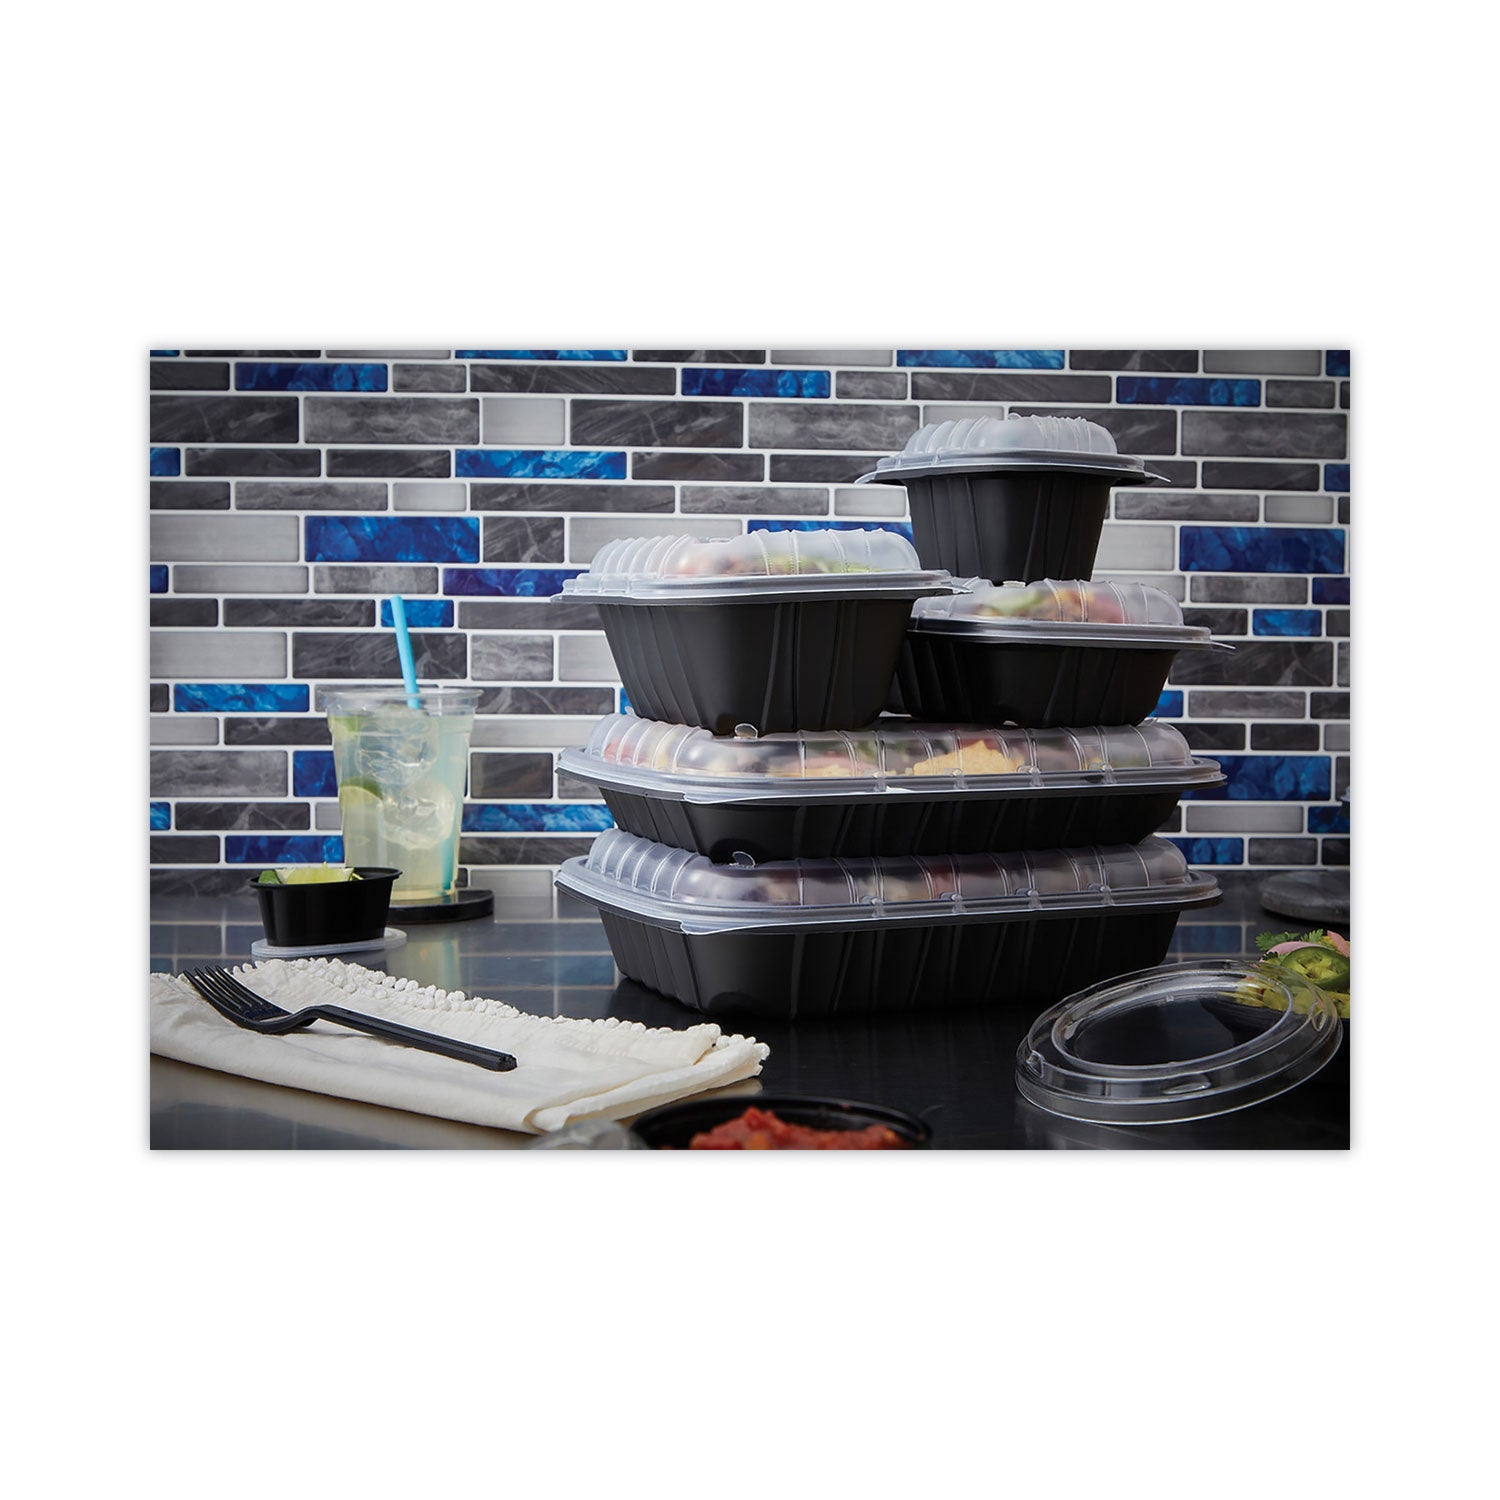 earthchoice-entree2go-takeout-container-12-oz-565-x-425-x-257-black-plastic-600-carton_pctycnb6x412000 - 2